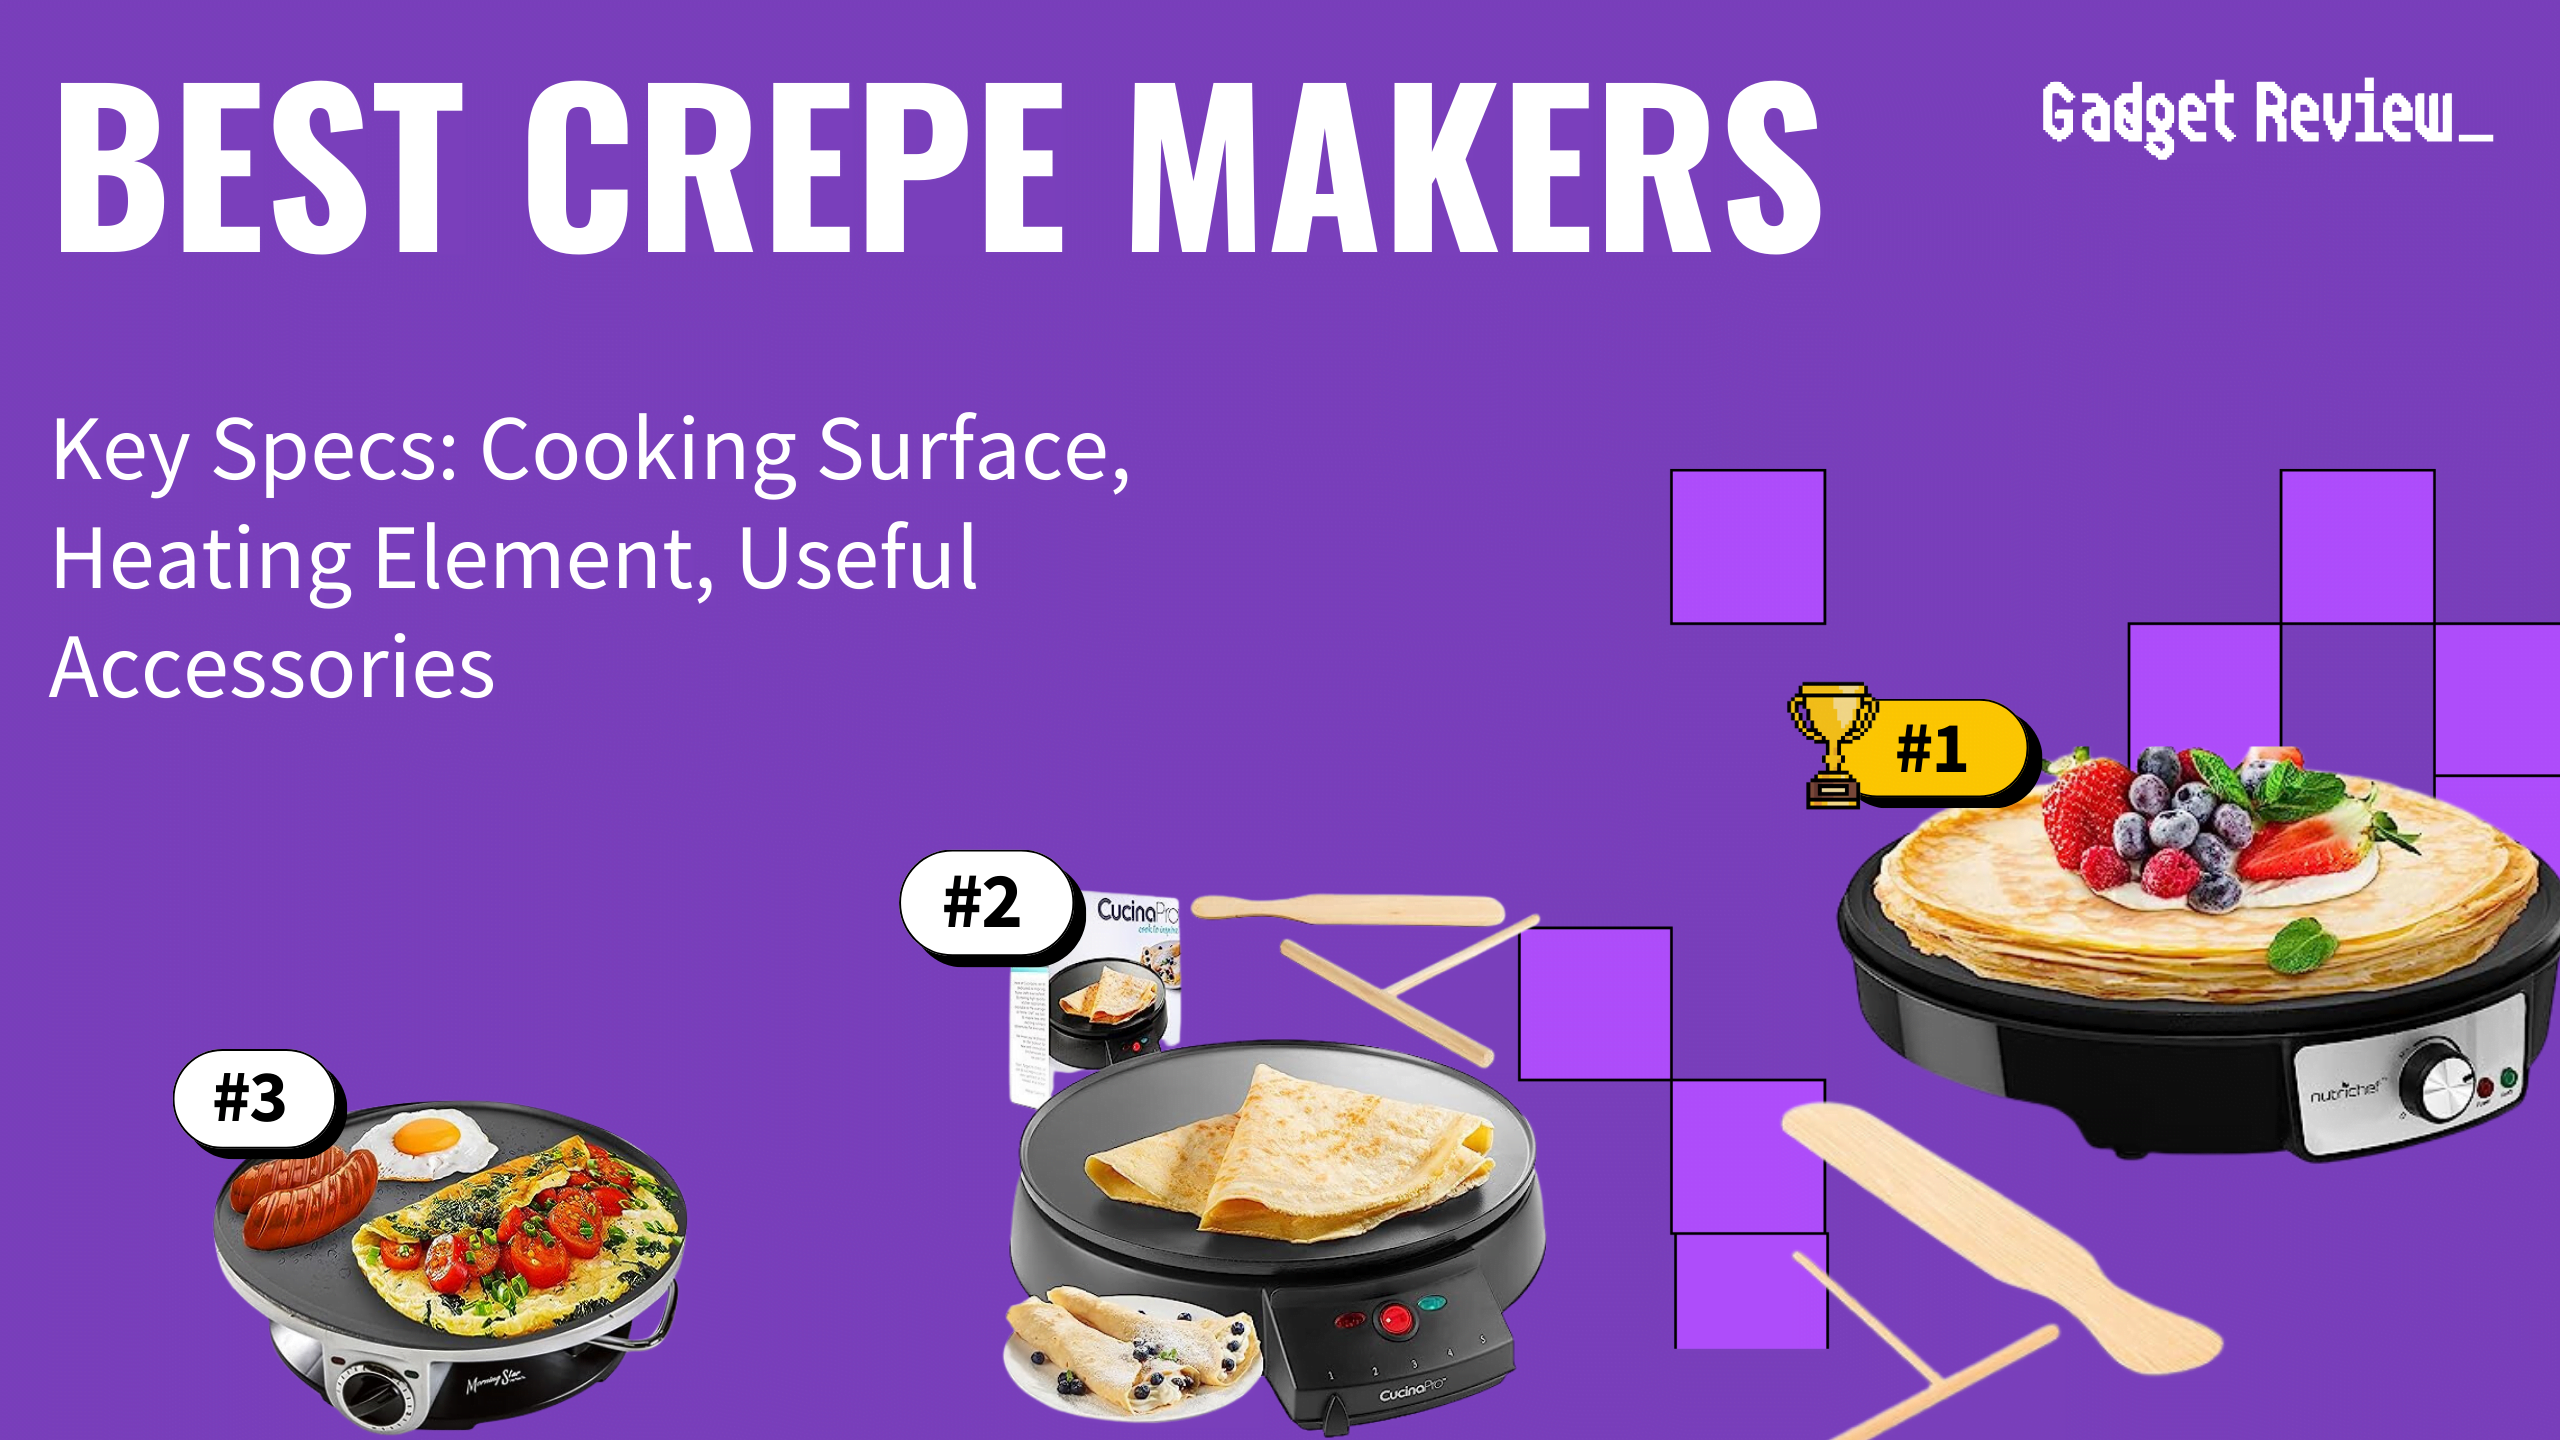 Squeegee and mini pancake apparatus, Crepe makers, Appliances